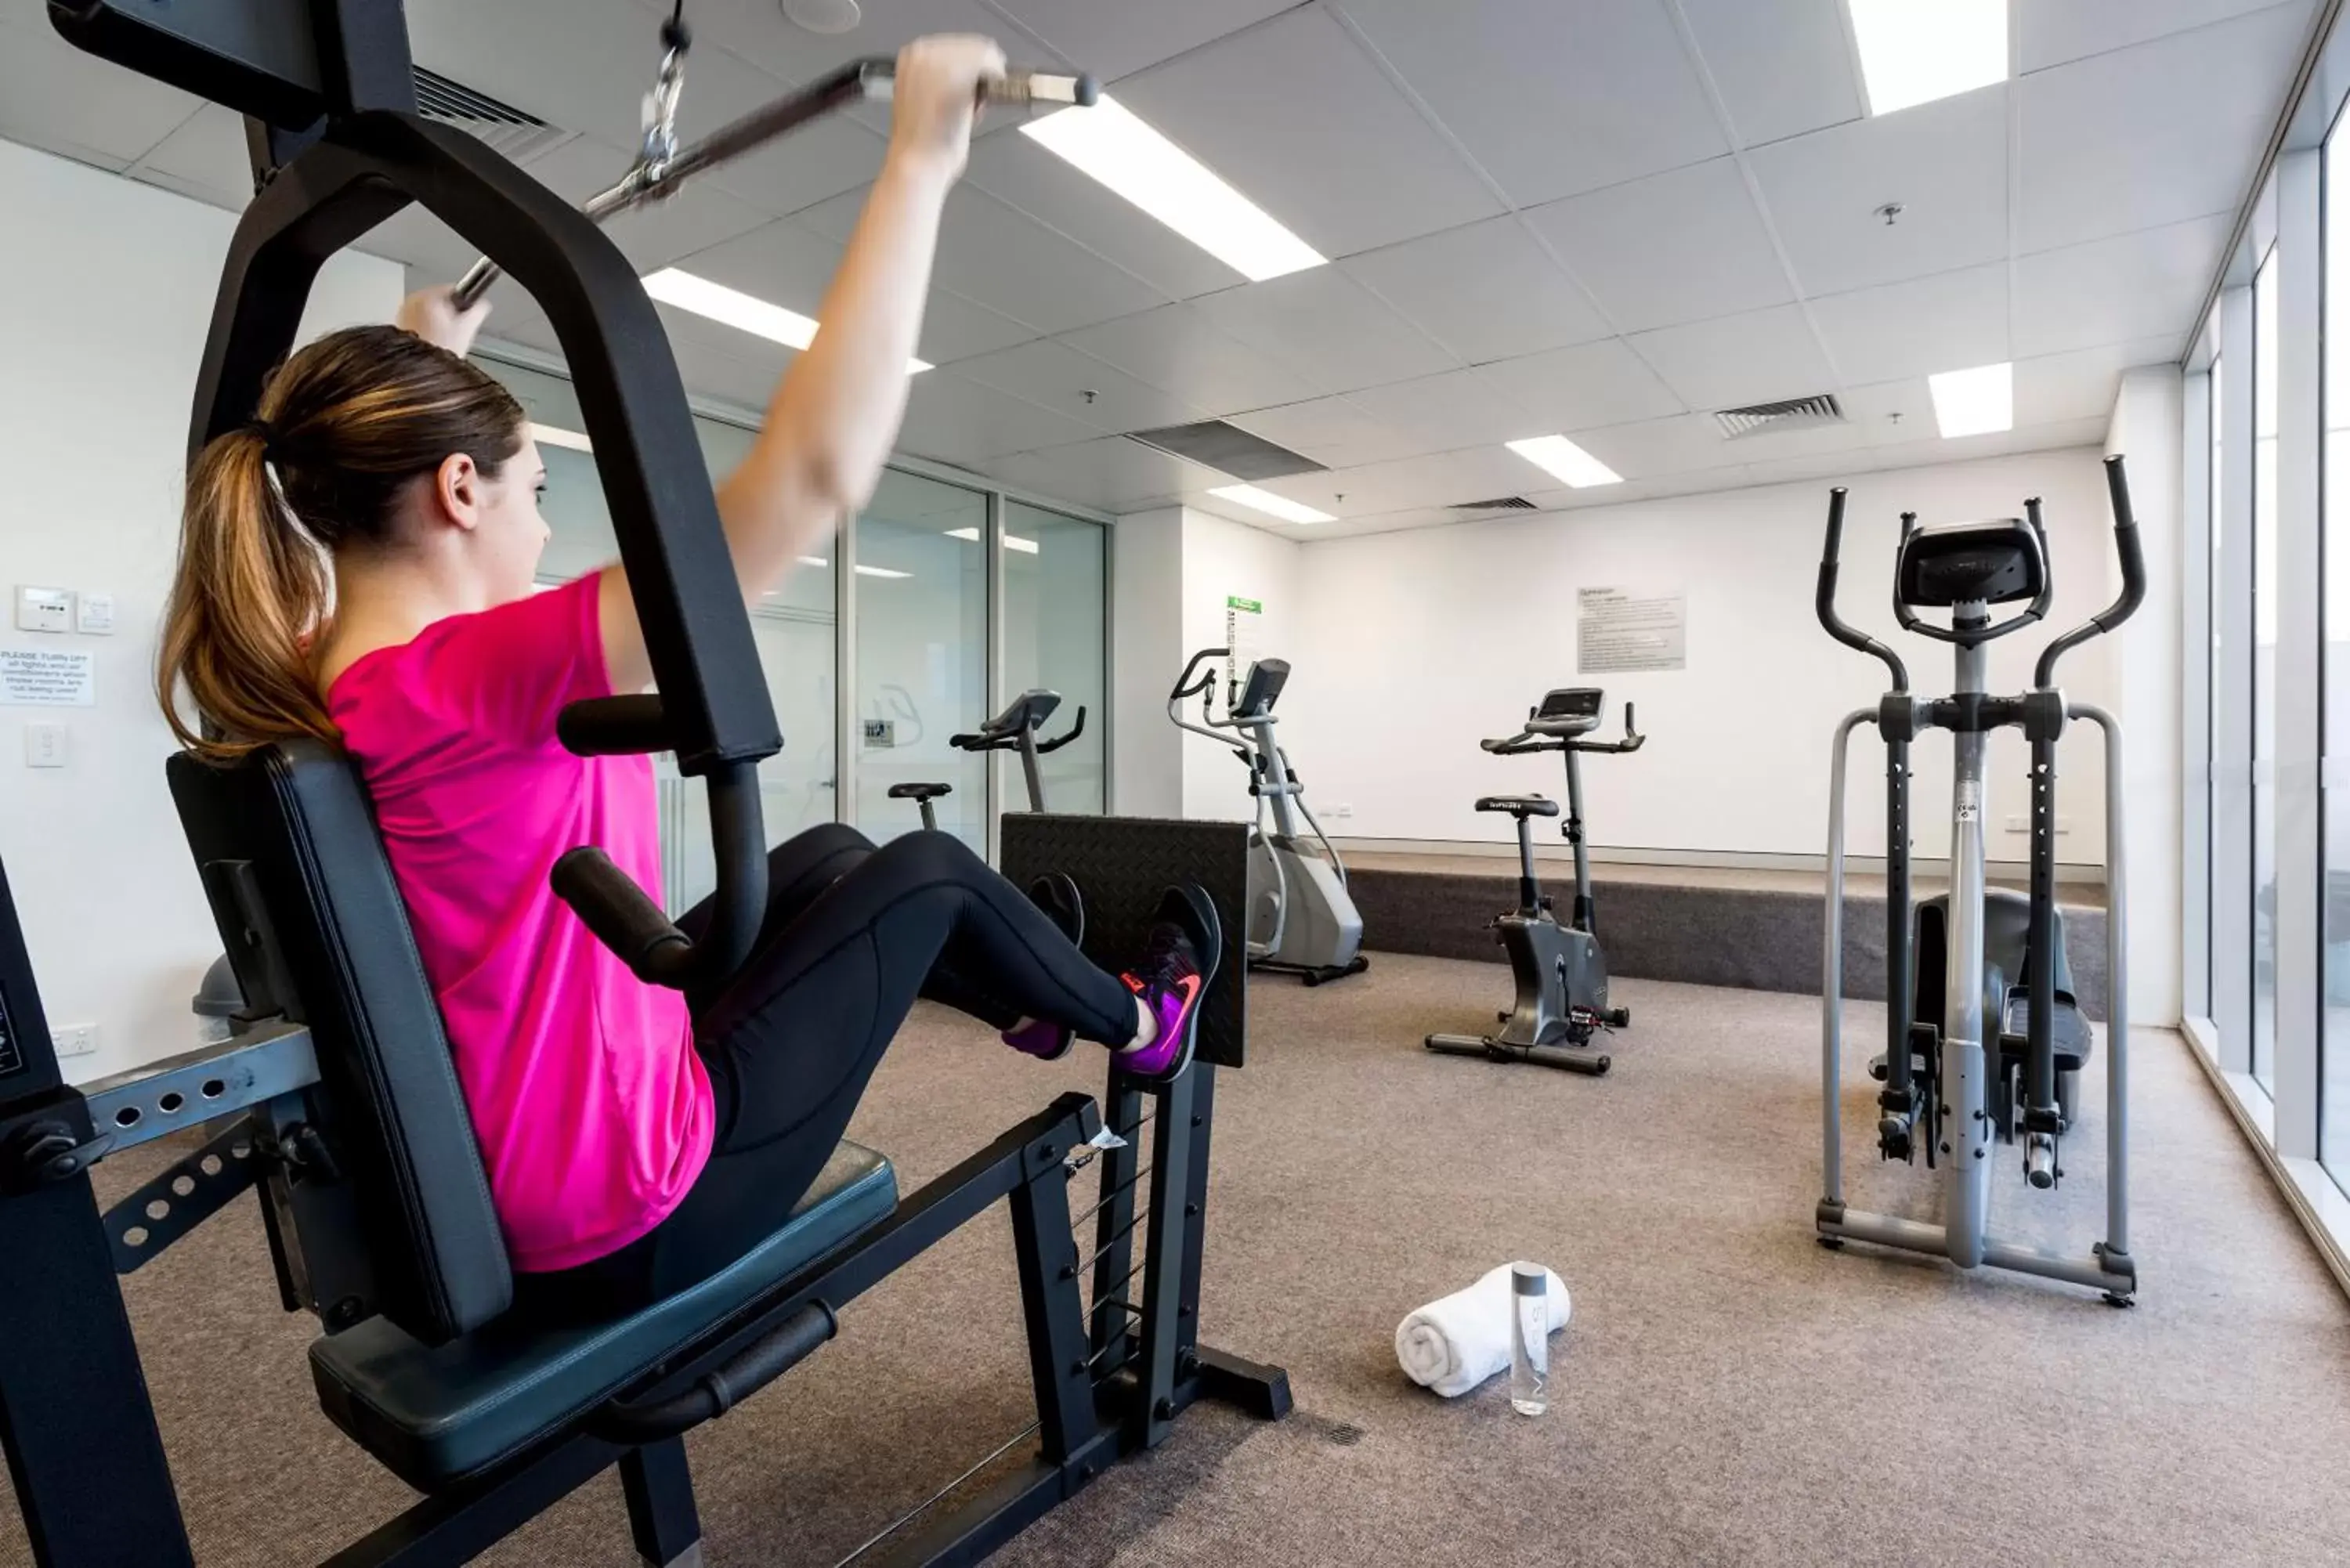 Fitness centre/facilities, Fitness Center/Facilities in Oaks Ipswich Aspire Suites